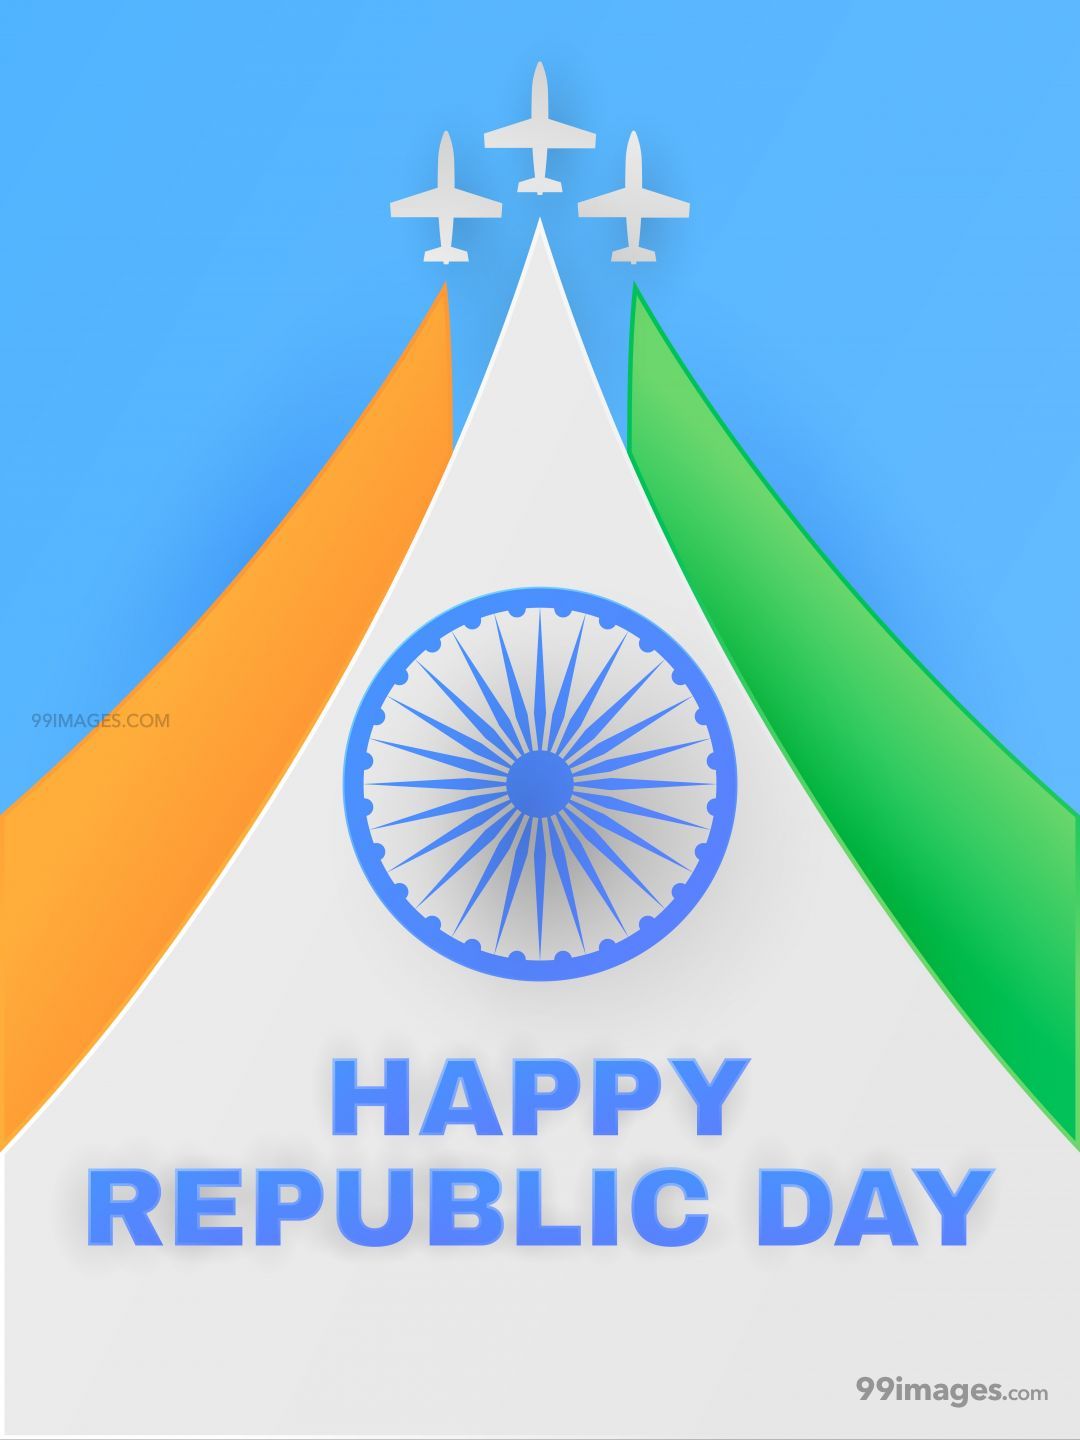 [26th January 2020] Happy Republic Day Whatsapp Dp - Republic Day Hd Images 2020 Download - HD Wallpaper 